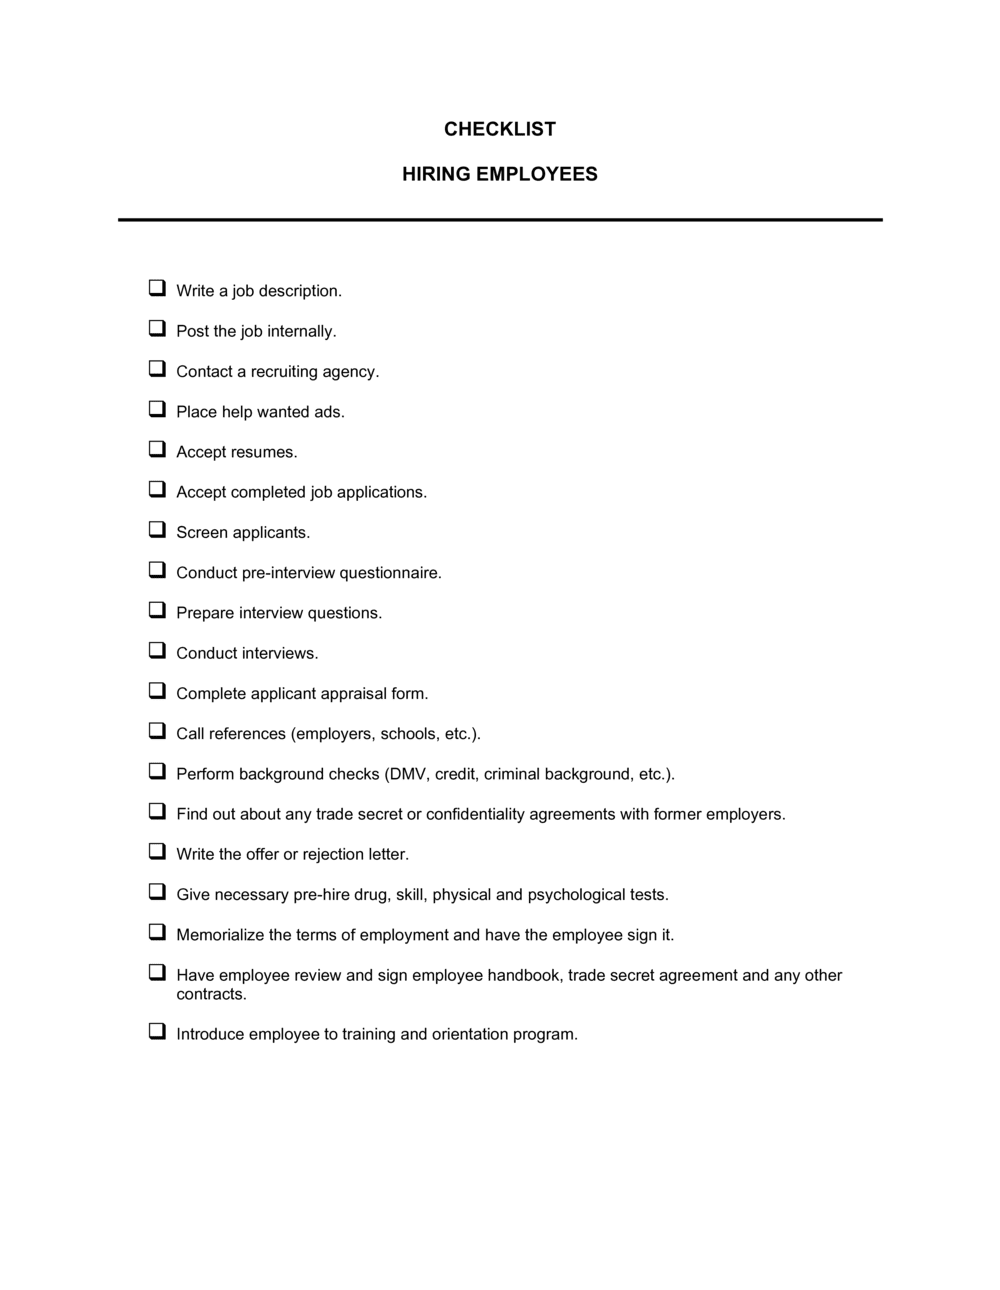 Checklist Hiring Employees Template  by Business-in-a-Box™ Within Personnel File Checklist Template Intended For Personnel File Checklist Template